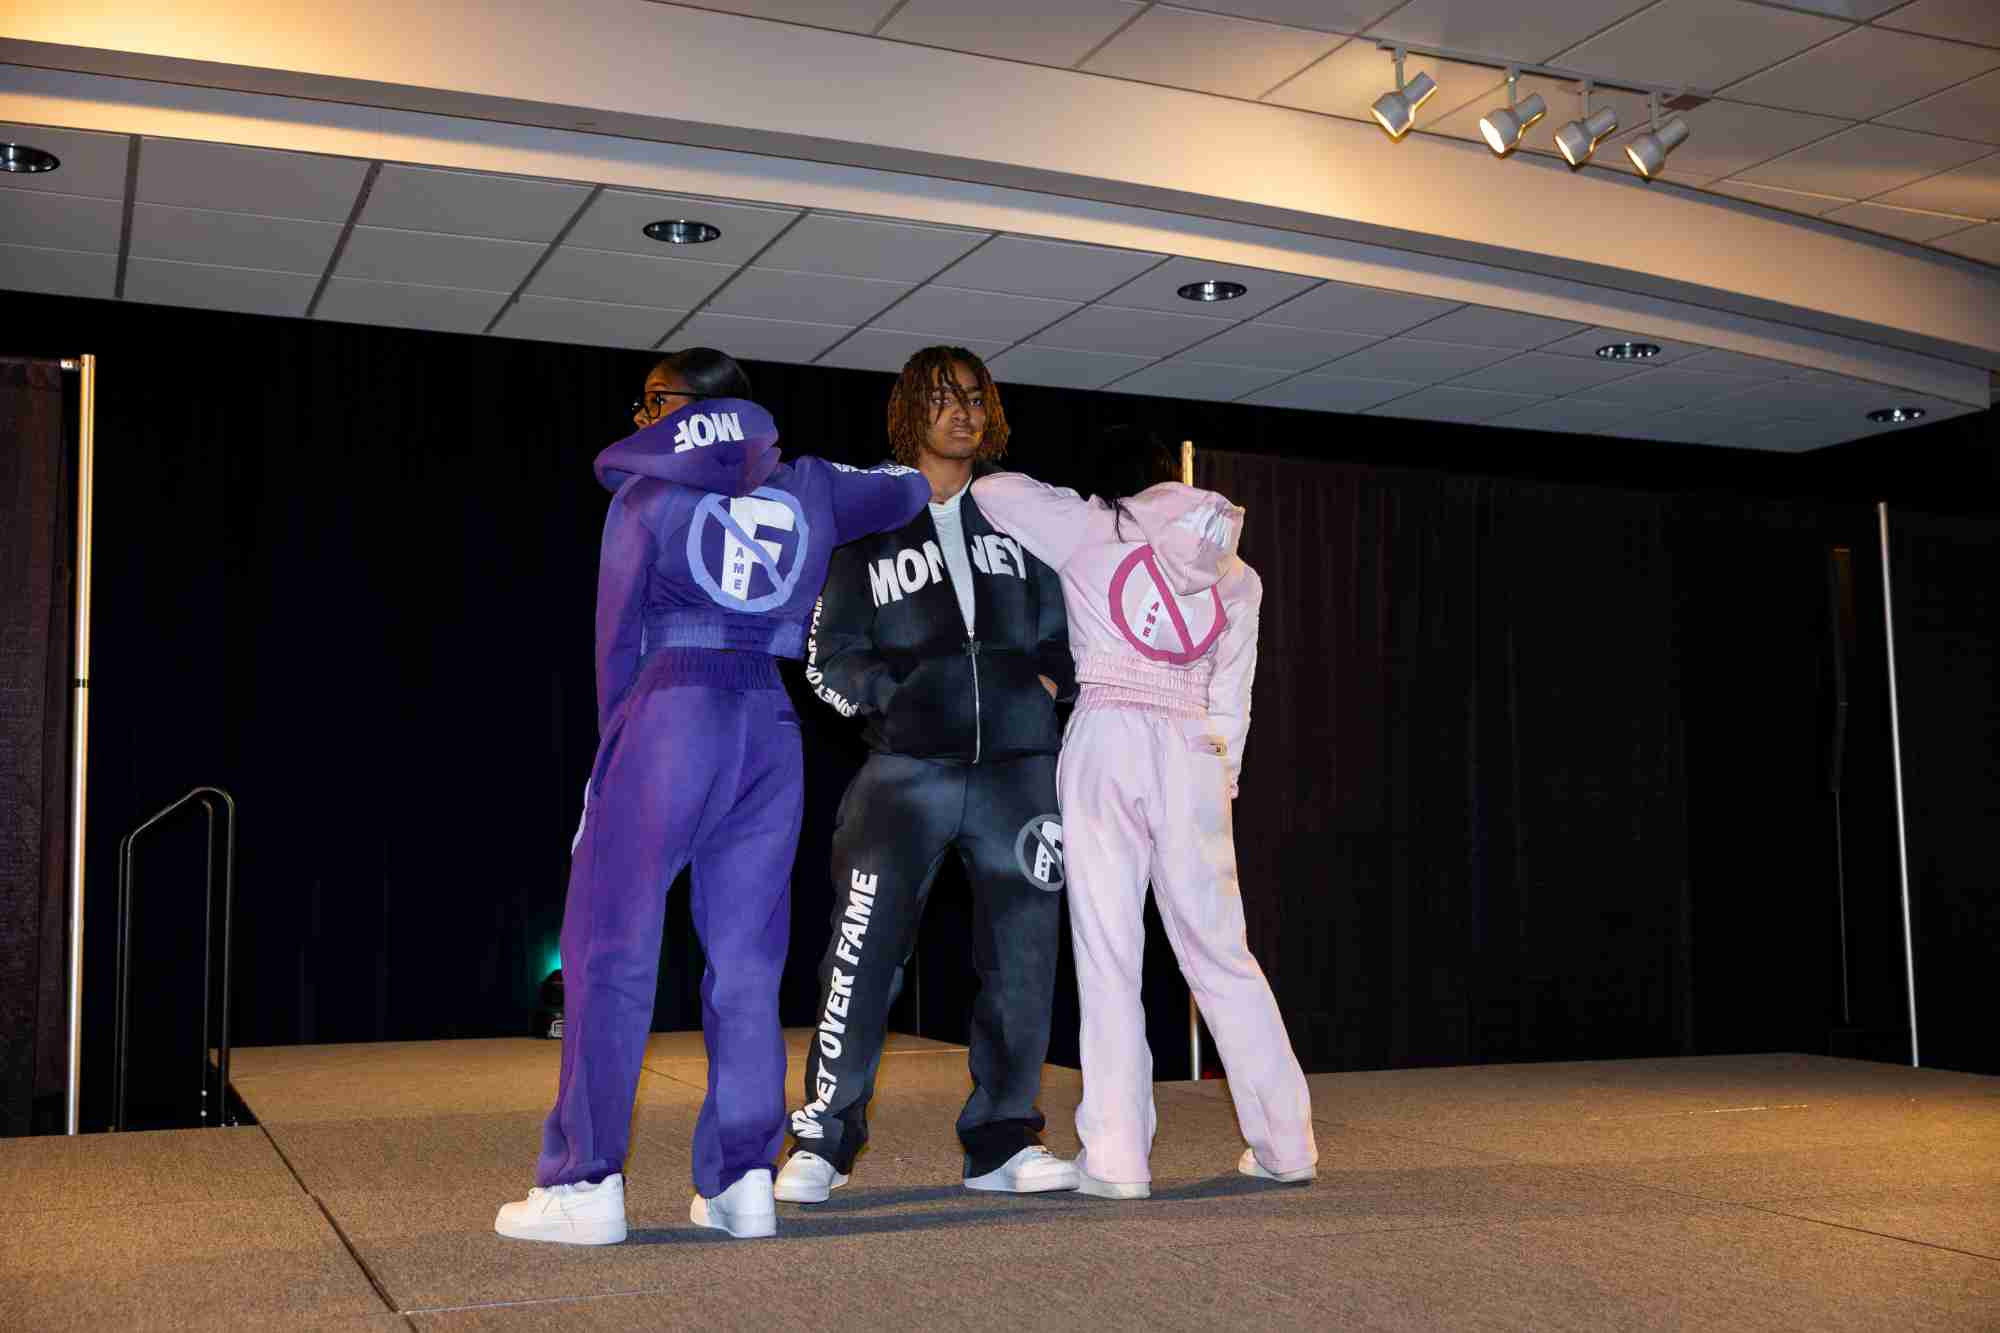 Three Model Entertainment students dressed in different colored sweat suits posing onstage